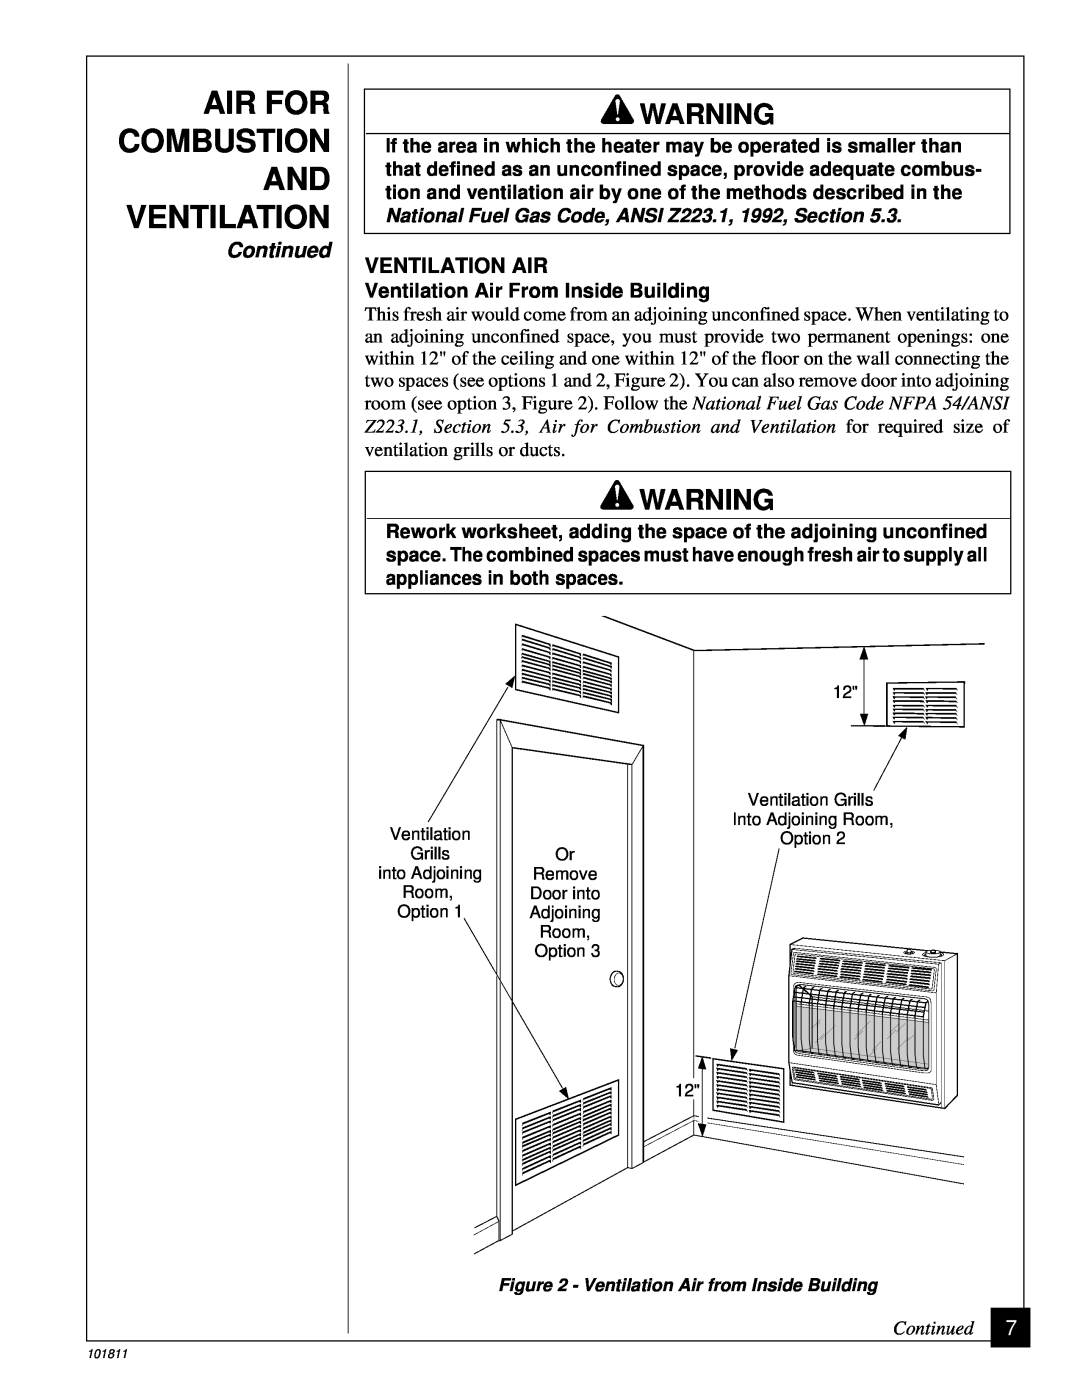 Desa 101811-01C.pdf Air For Combustion And Ventilation, Continued, Ventilation Air From Inside Building 